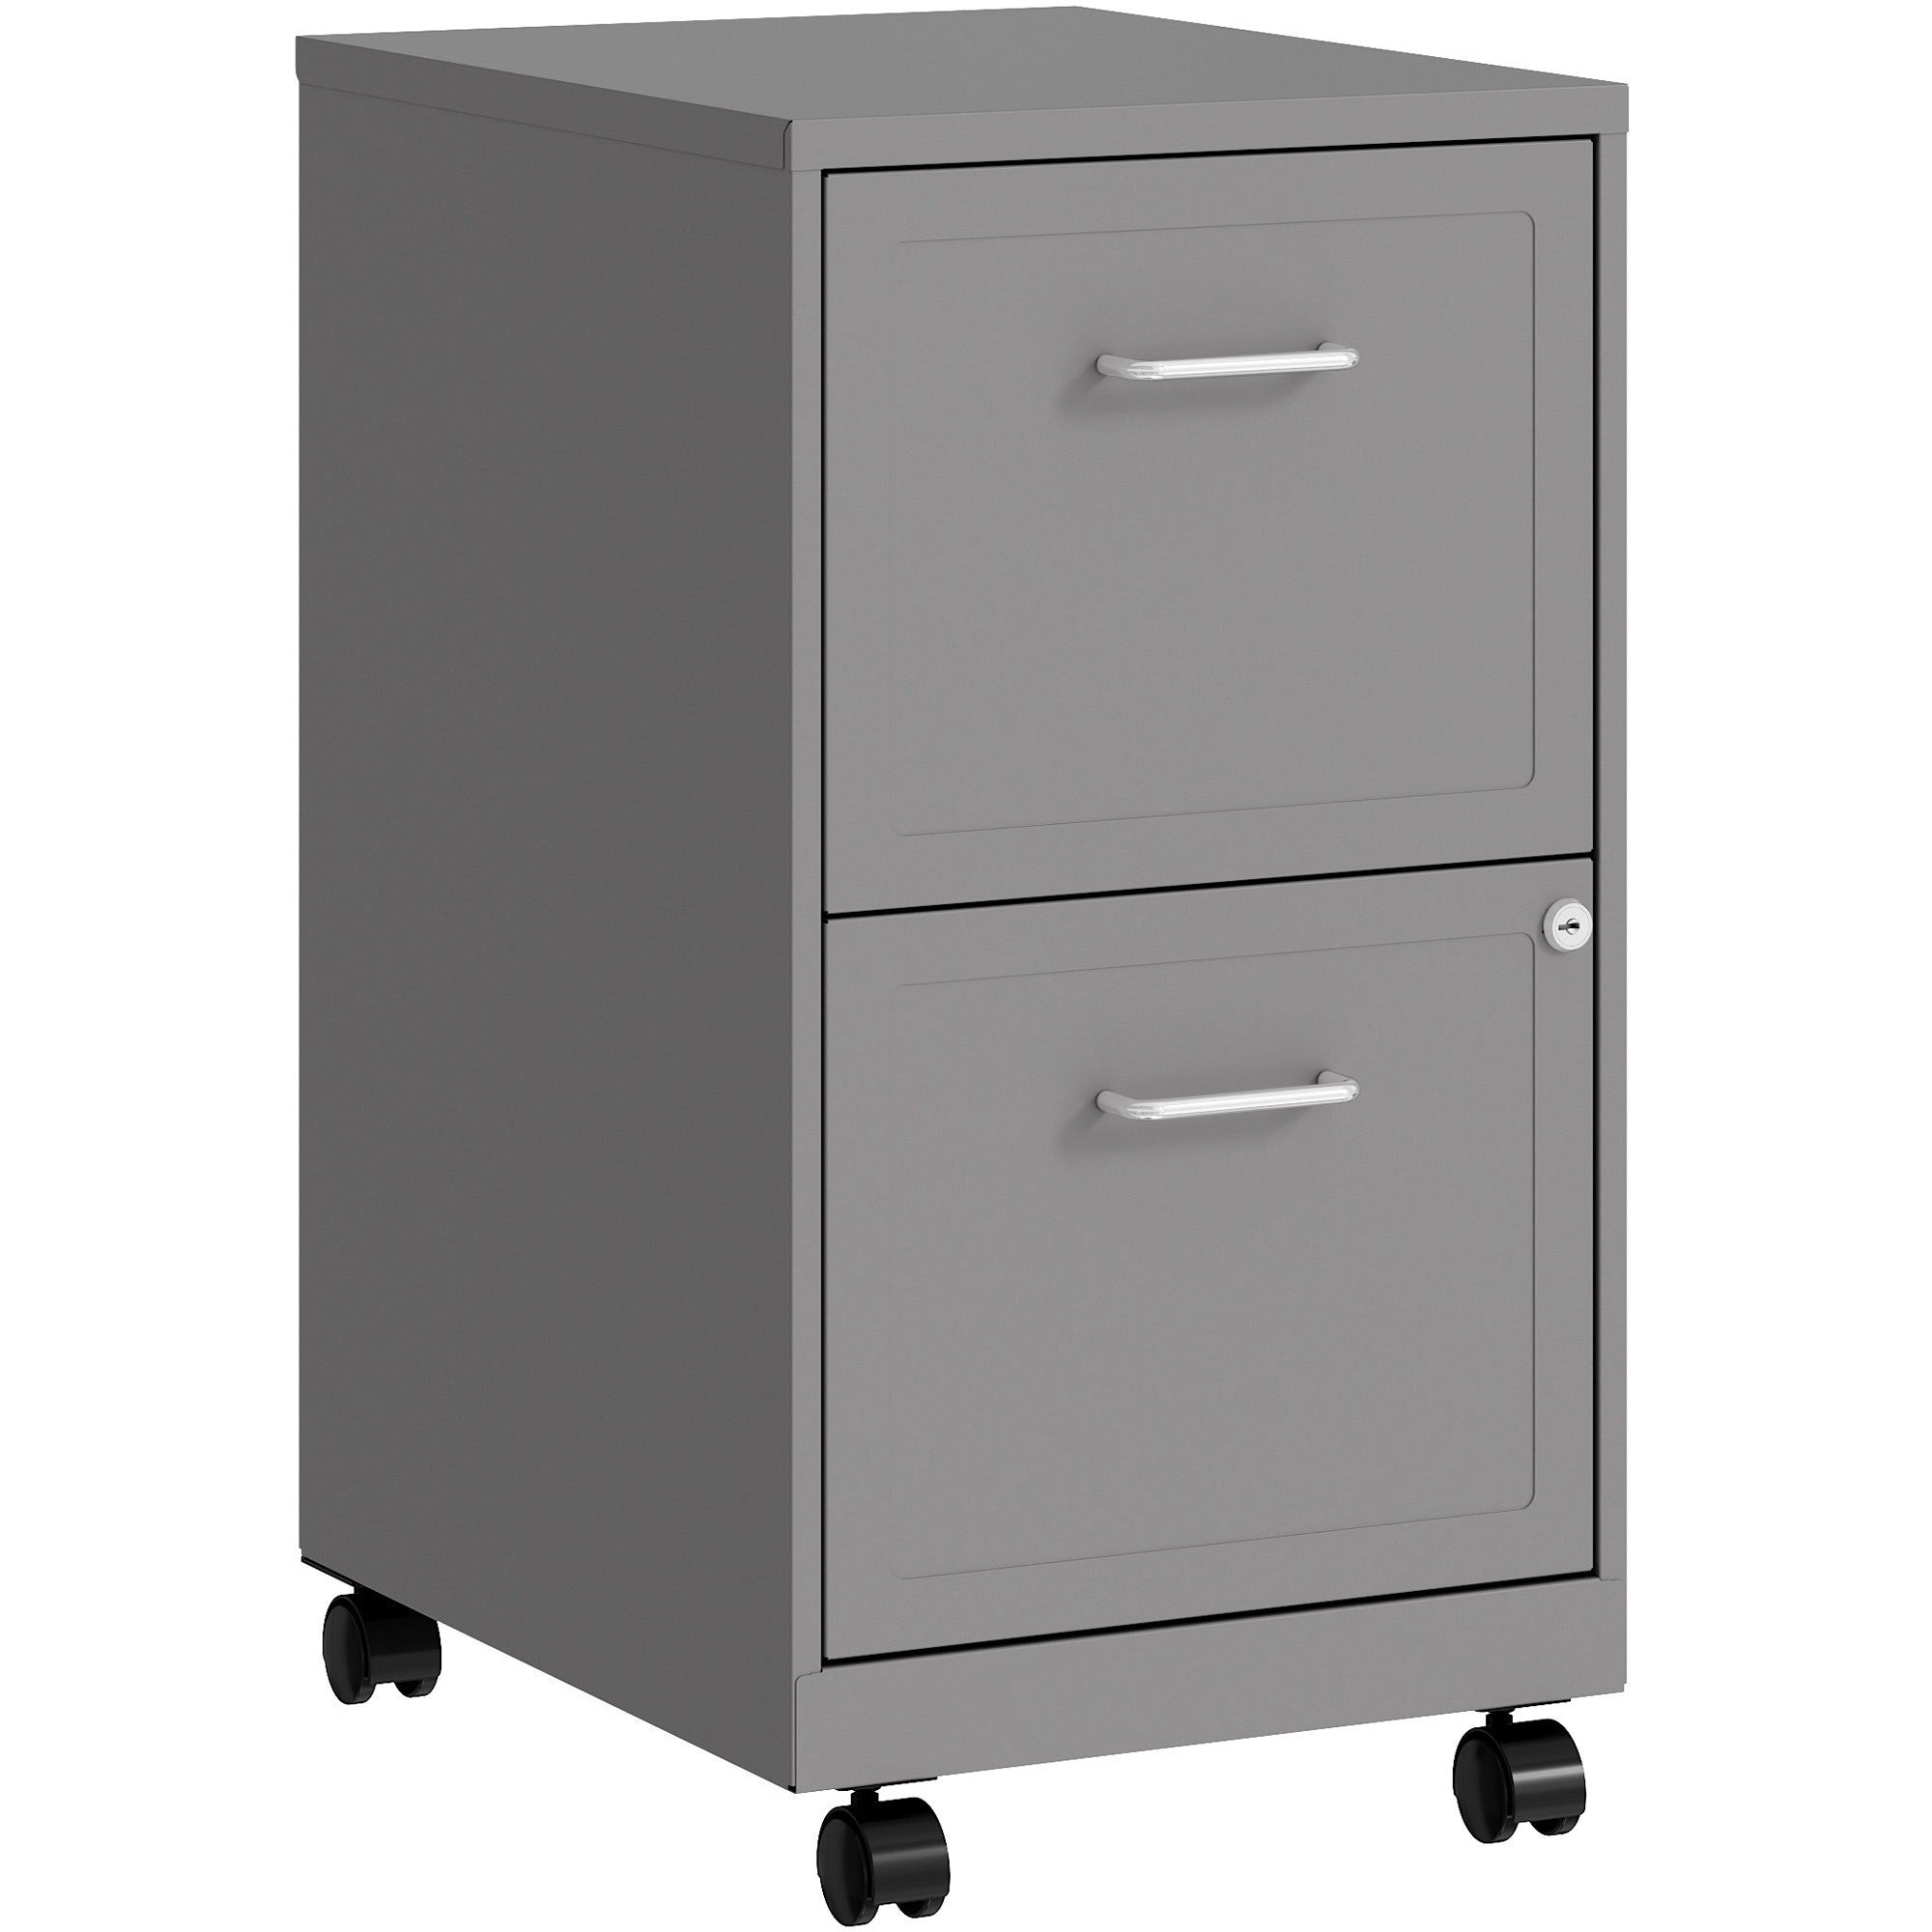 nusparc-mobile-file-cabinet-142-x-18-x-265-for-file-letter-mobility-locking-drawer-glide-suspension-3-4-drawer-extension-cam-lock-nonporous-surface-silver-painted-steel-steel-recycled_nprvf218amsr - 1